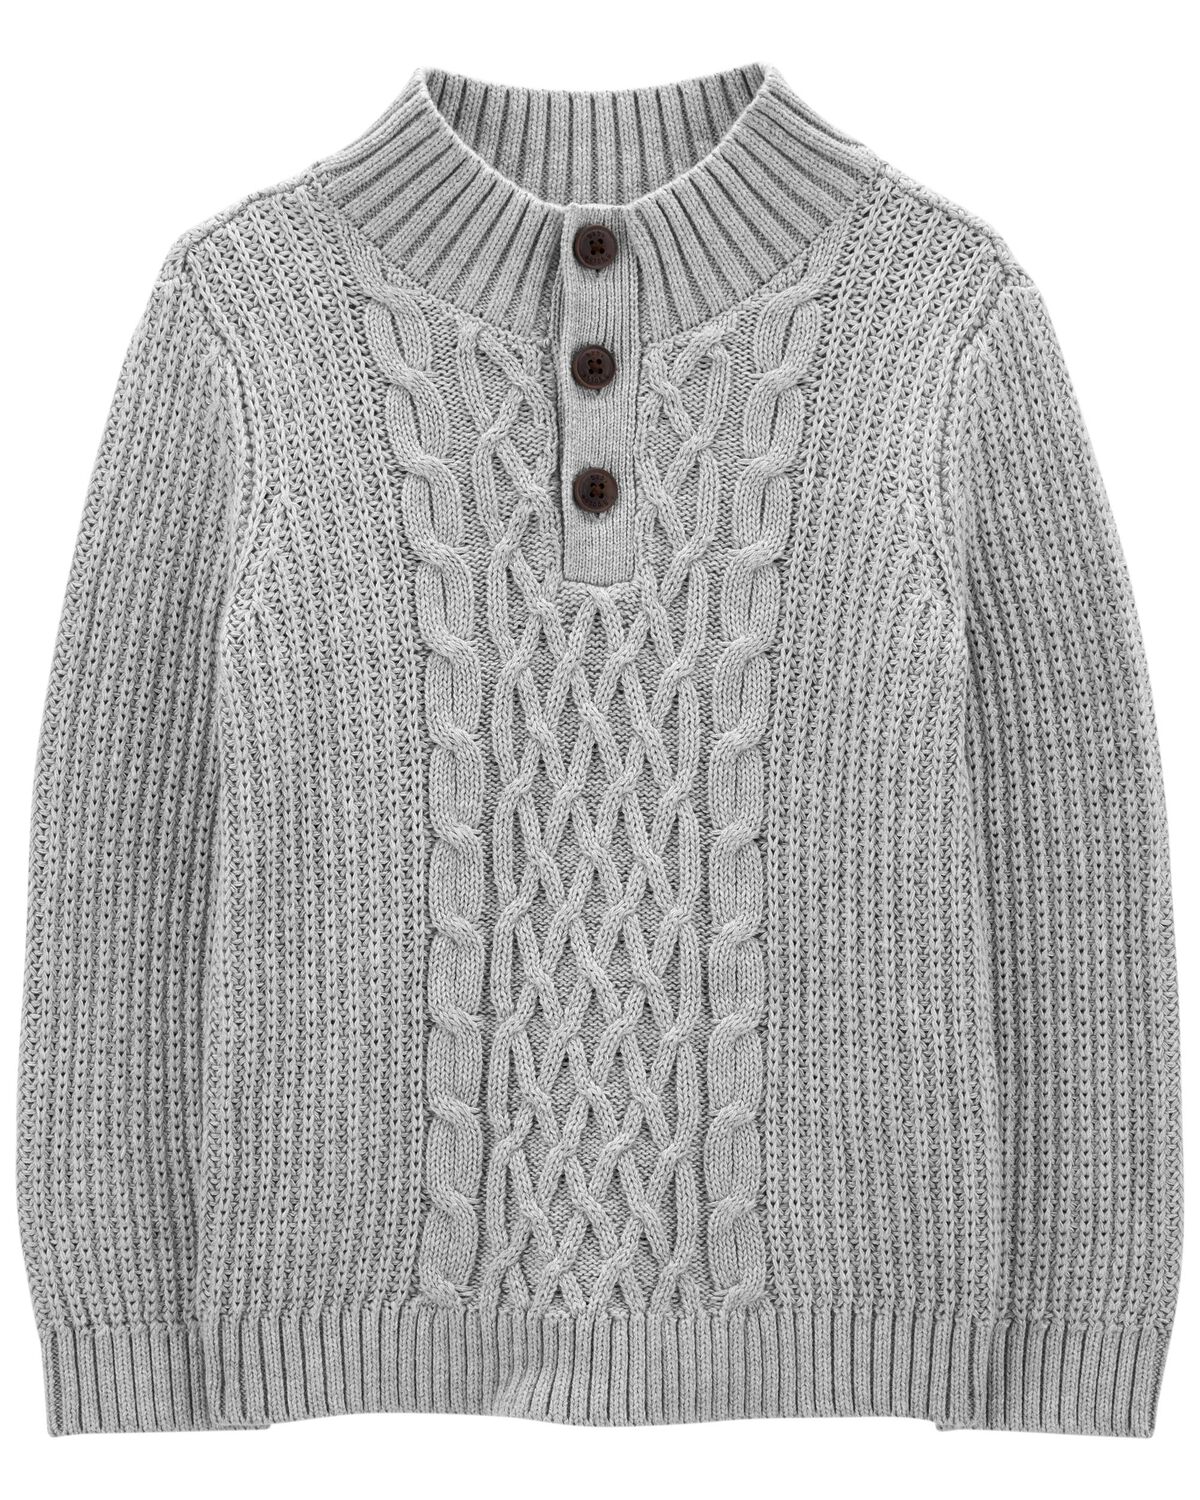 Toddler Cable Knit Mock Neck Pullover Sweater